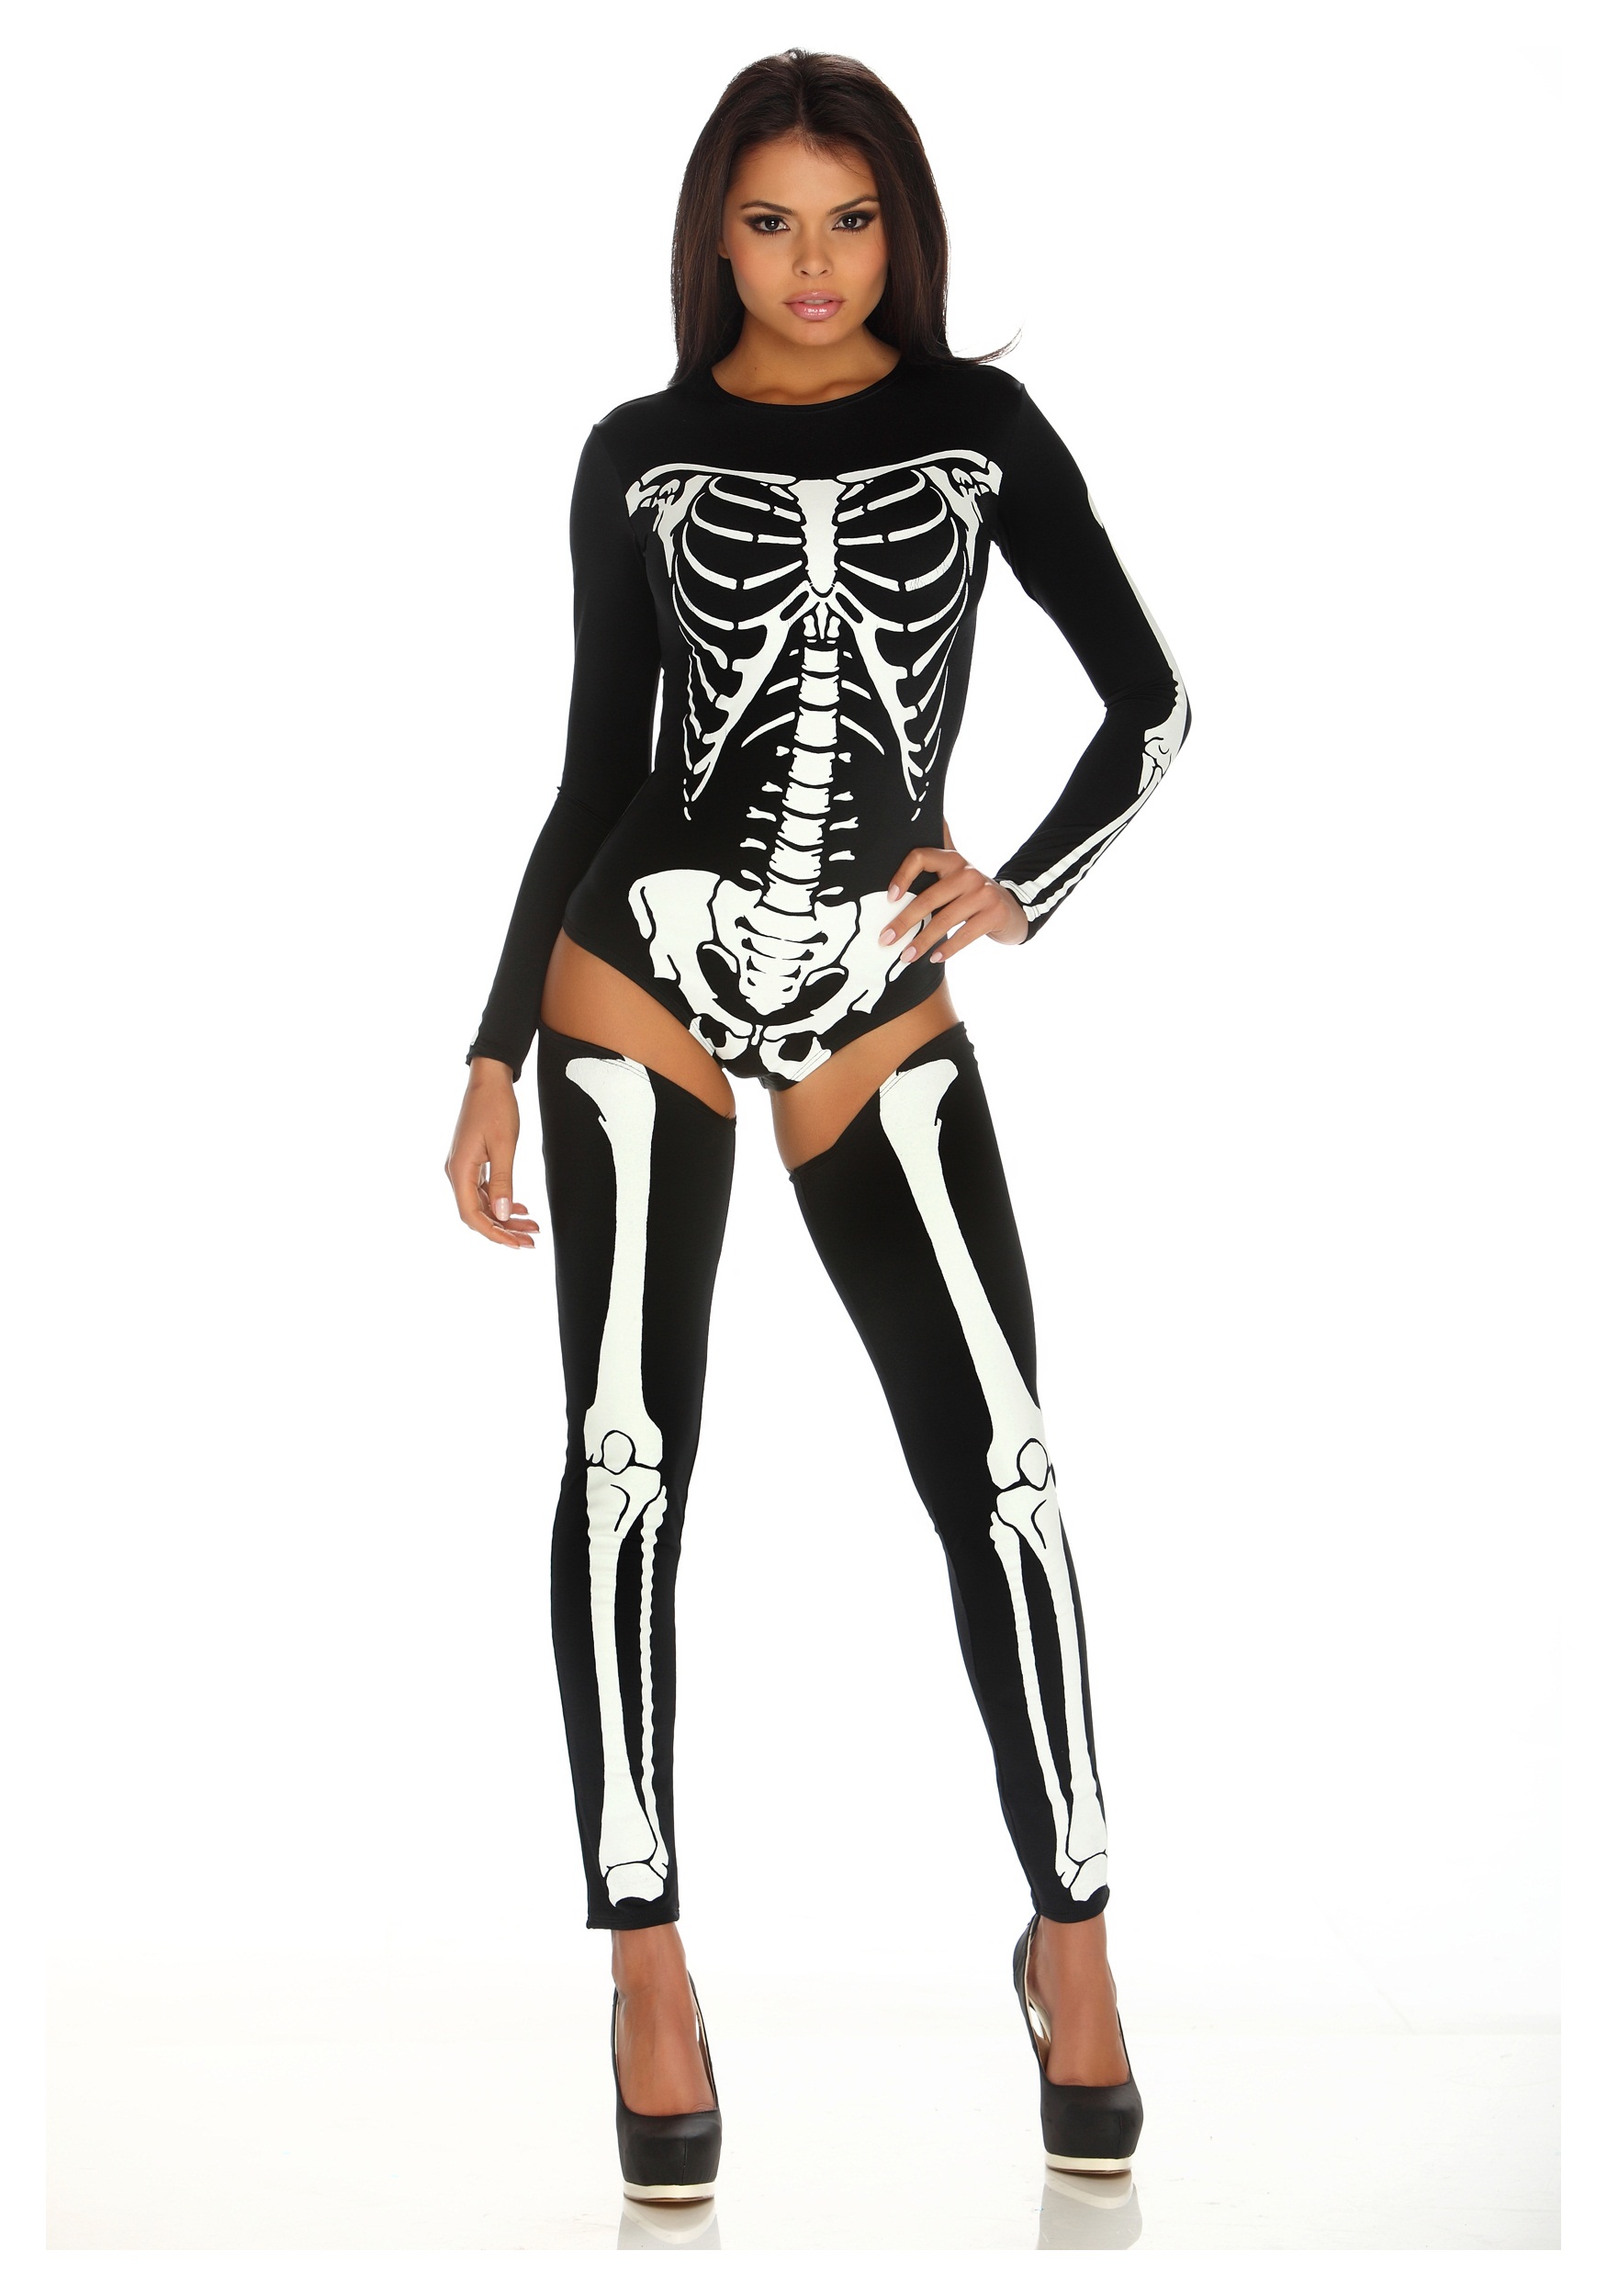 Image of Bad to the Bone Costume for Women ID FP553457-S/M